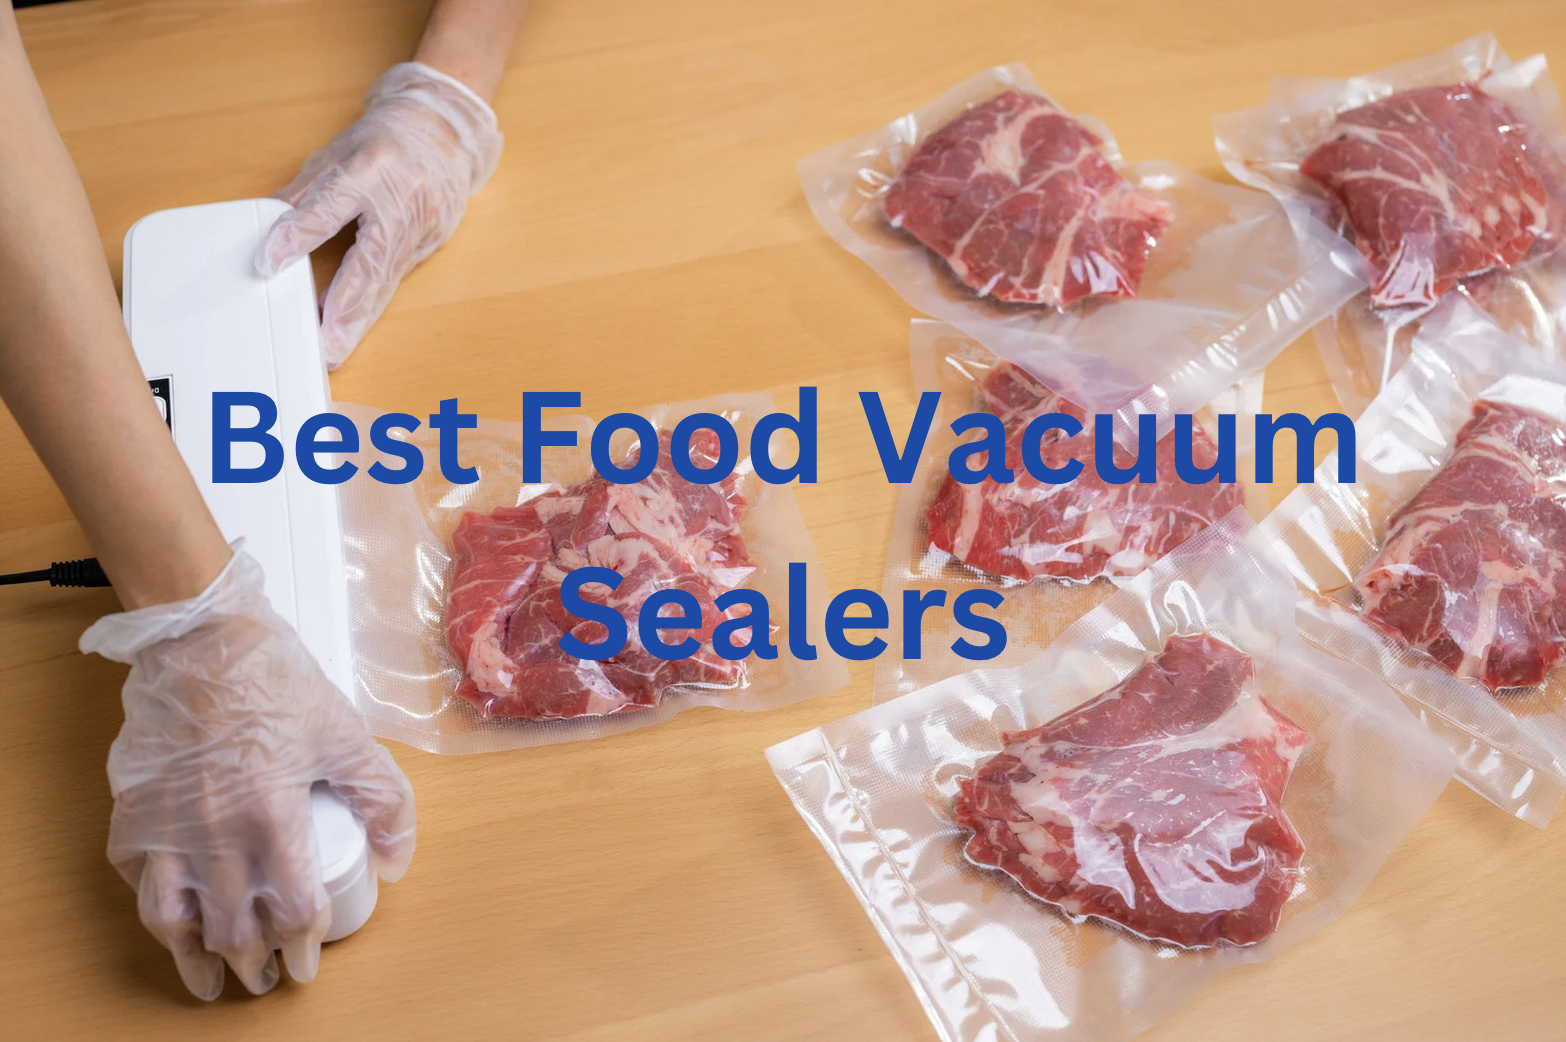 The Best Food Vacuum Sealers to Keep Your Meat and Veggies Fresh